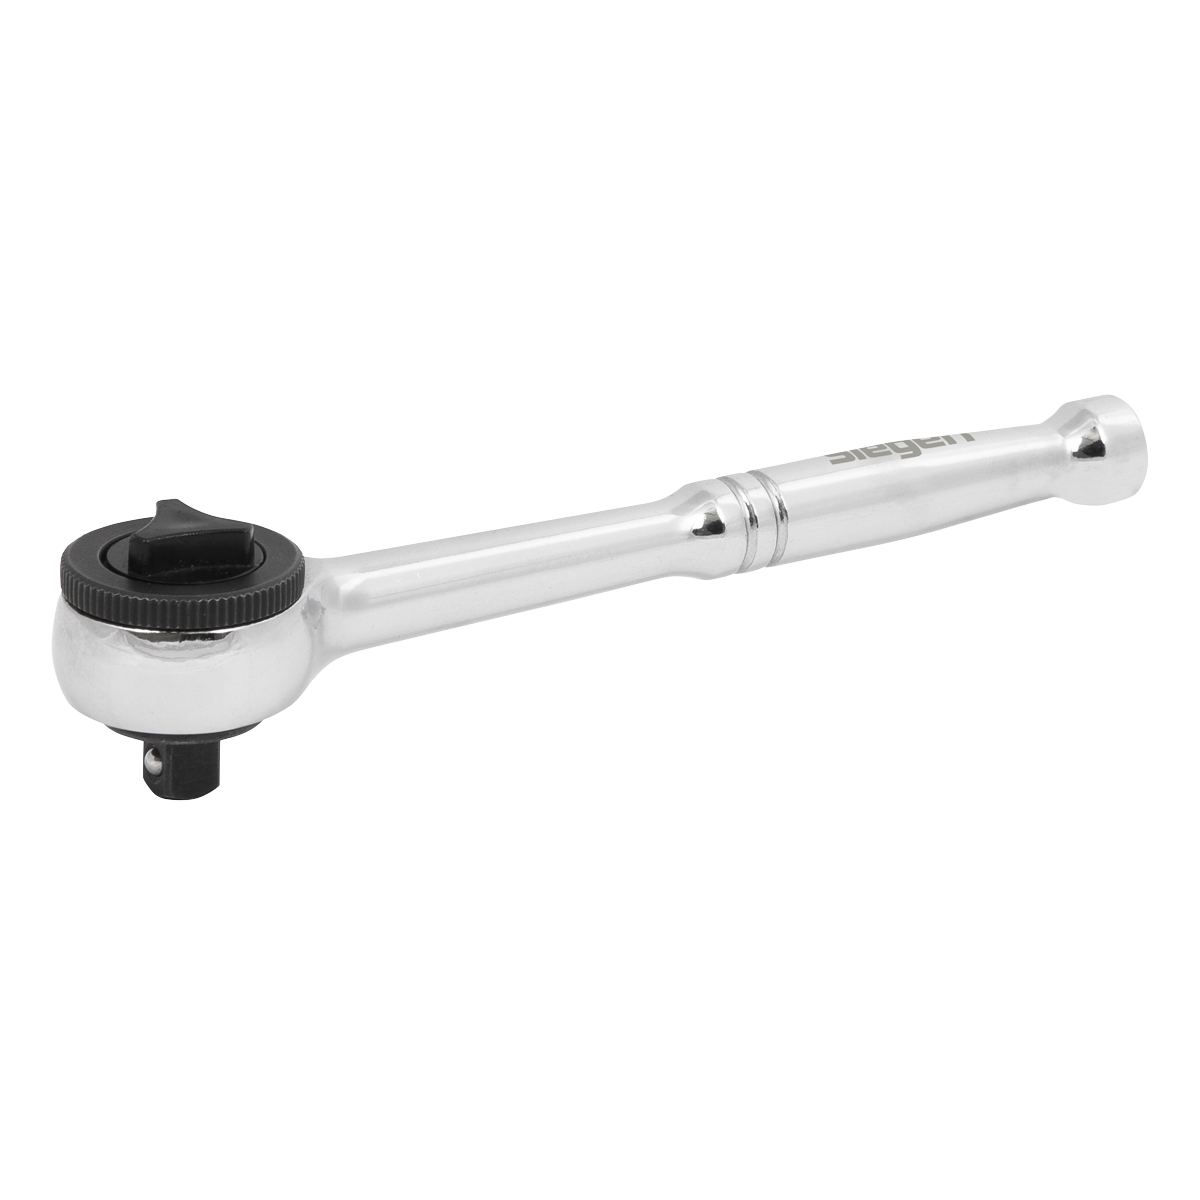 Ratchet Wrench 1/4"Sq Drive - S0506 - Farming Parts